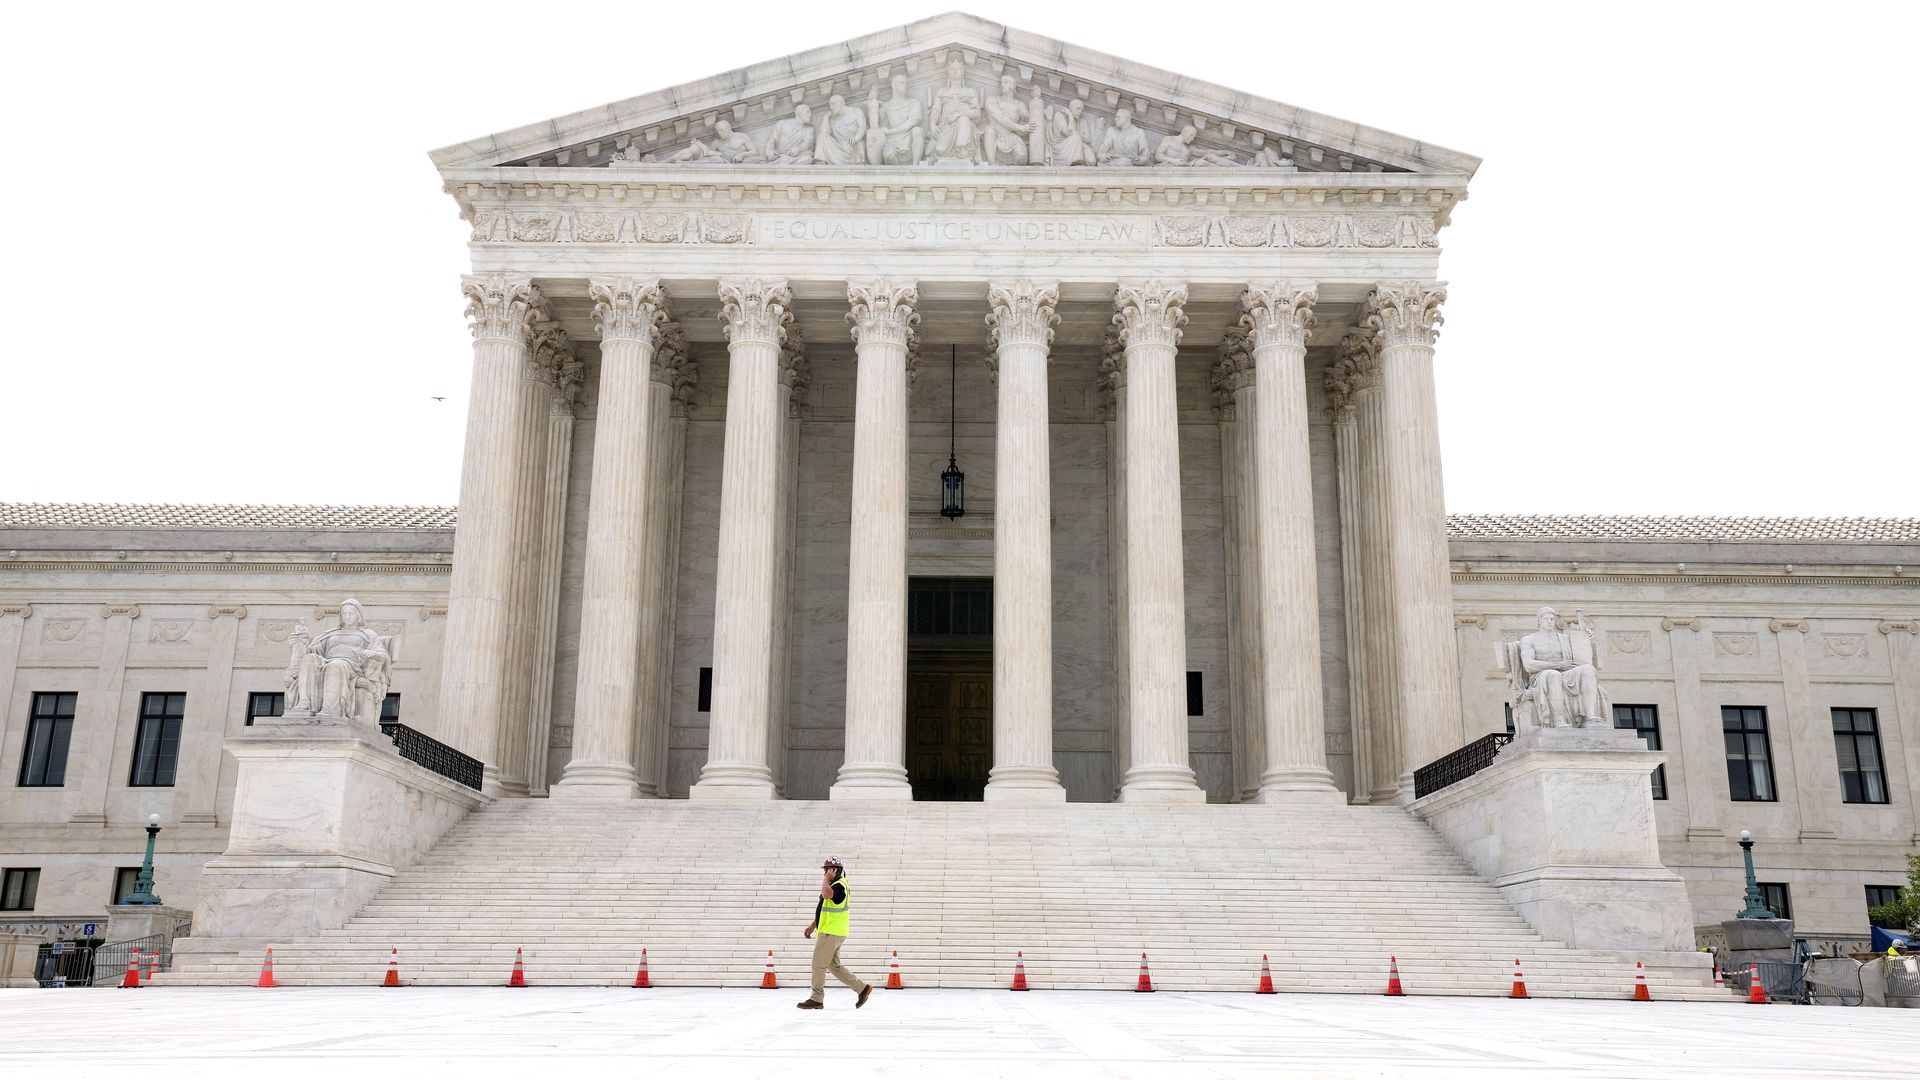 A worker walks on the plaza of the U.S. Supreme Court on June 10, 2021 in Washington, DC.